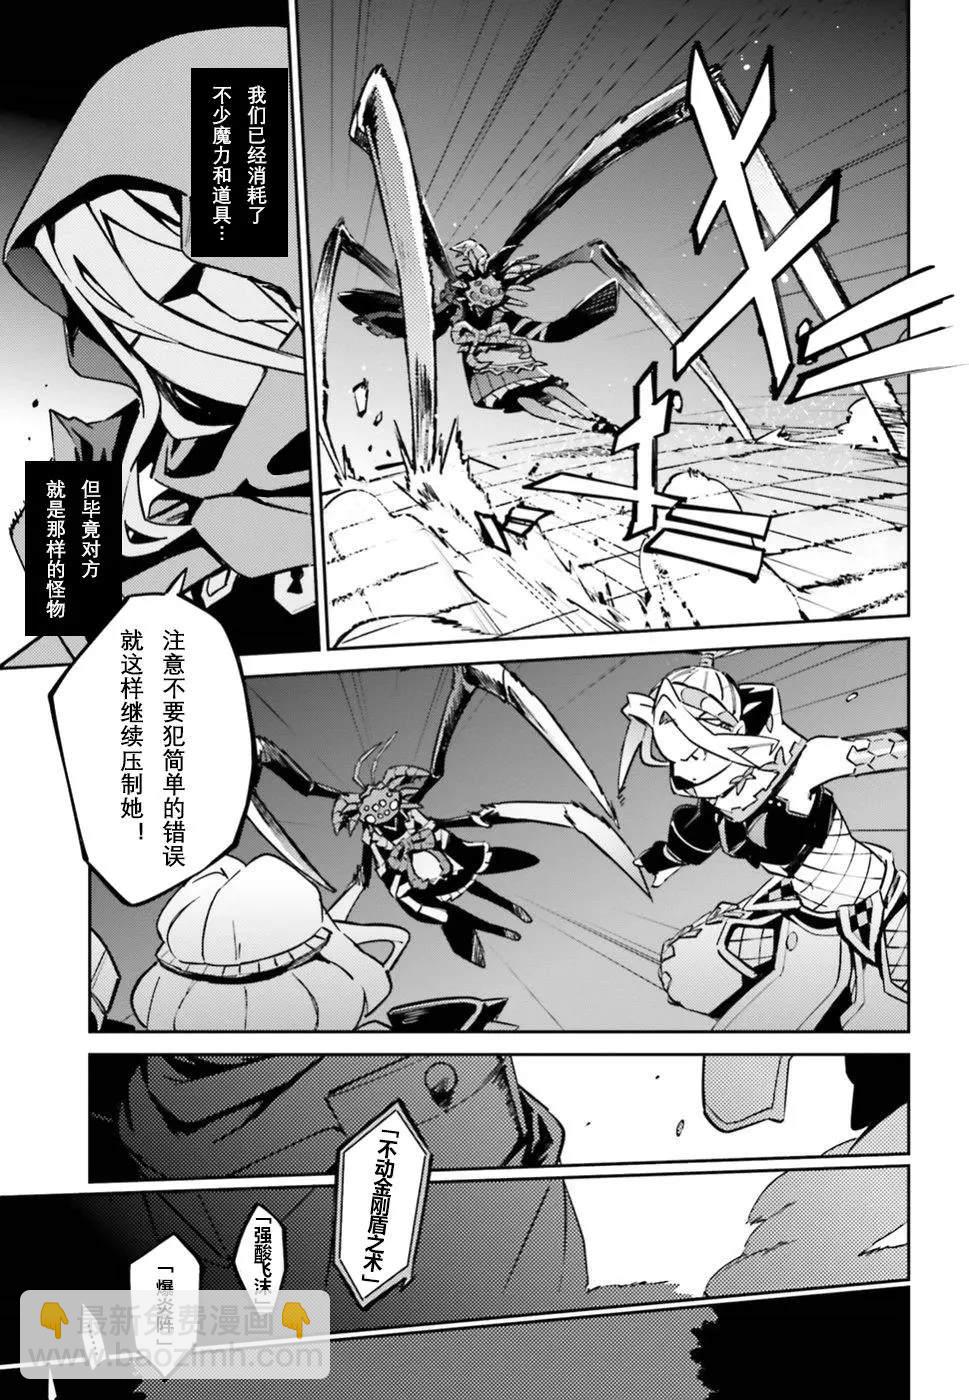 OVERLORD - 第46话 - 1